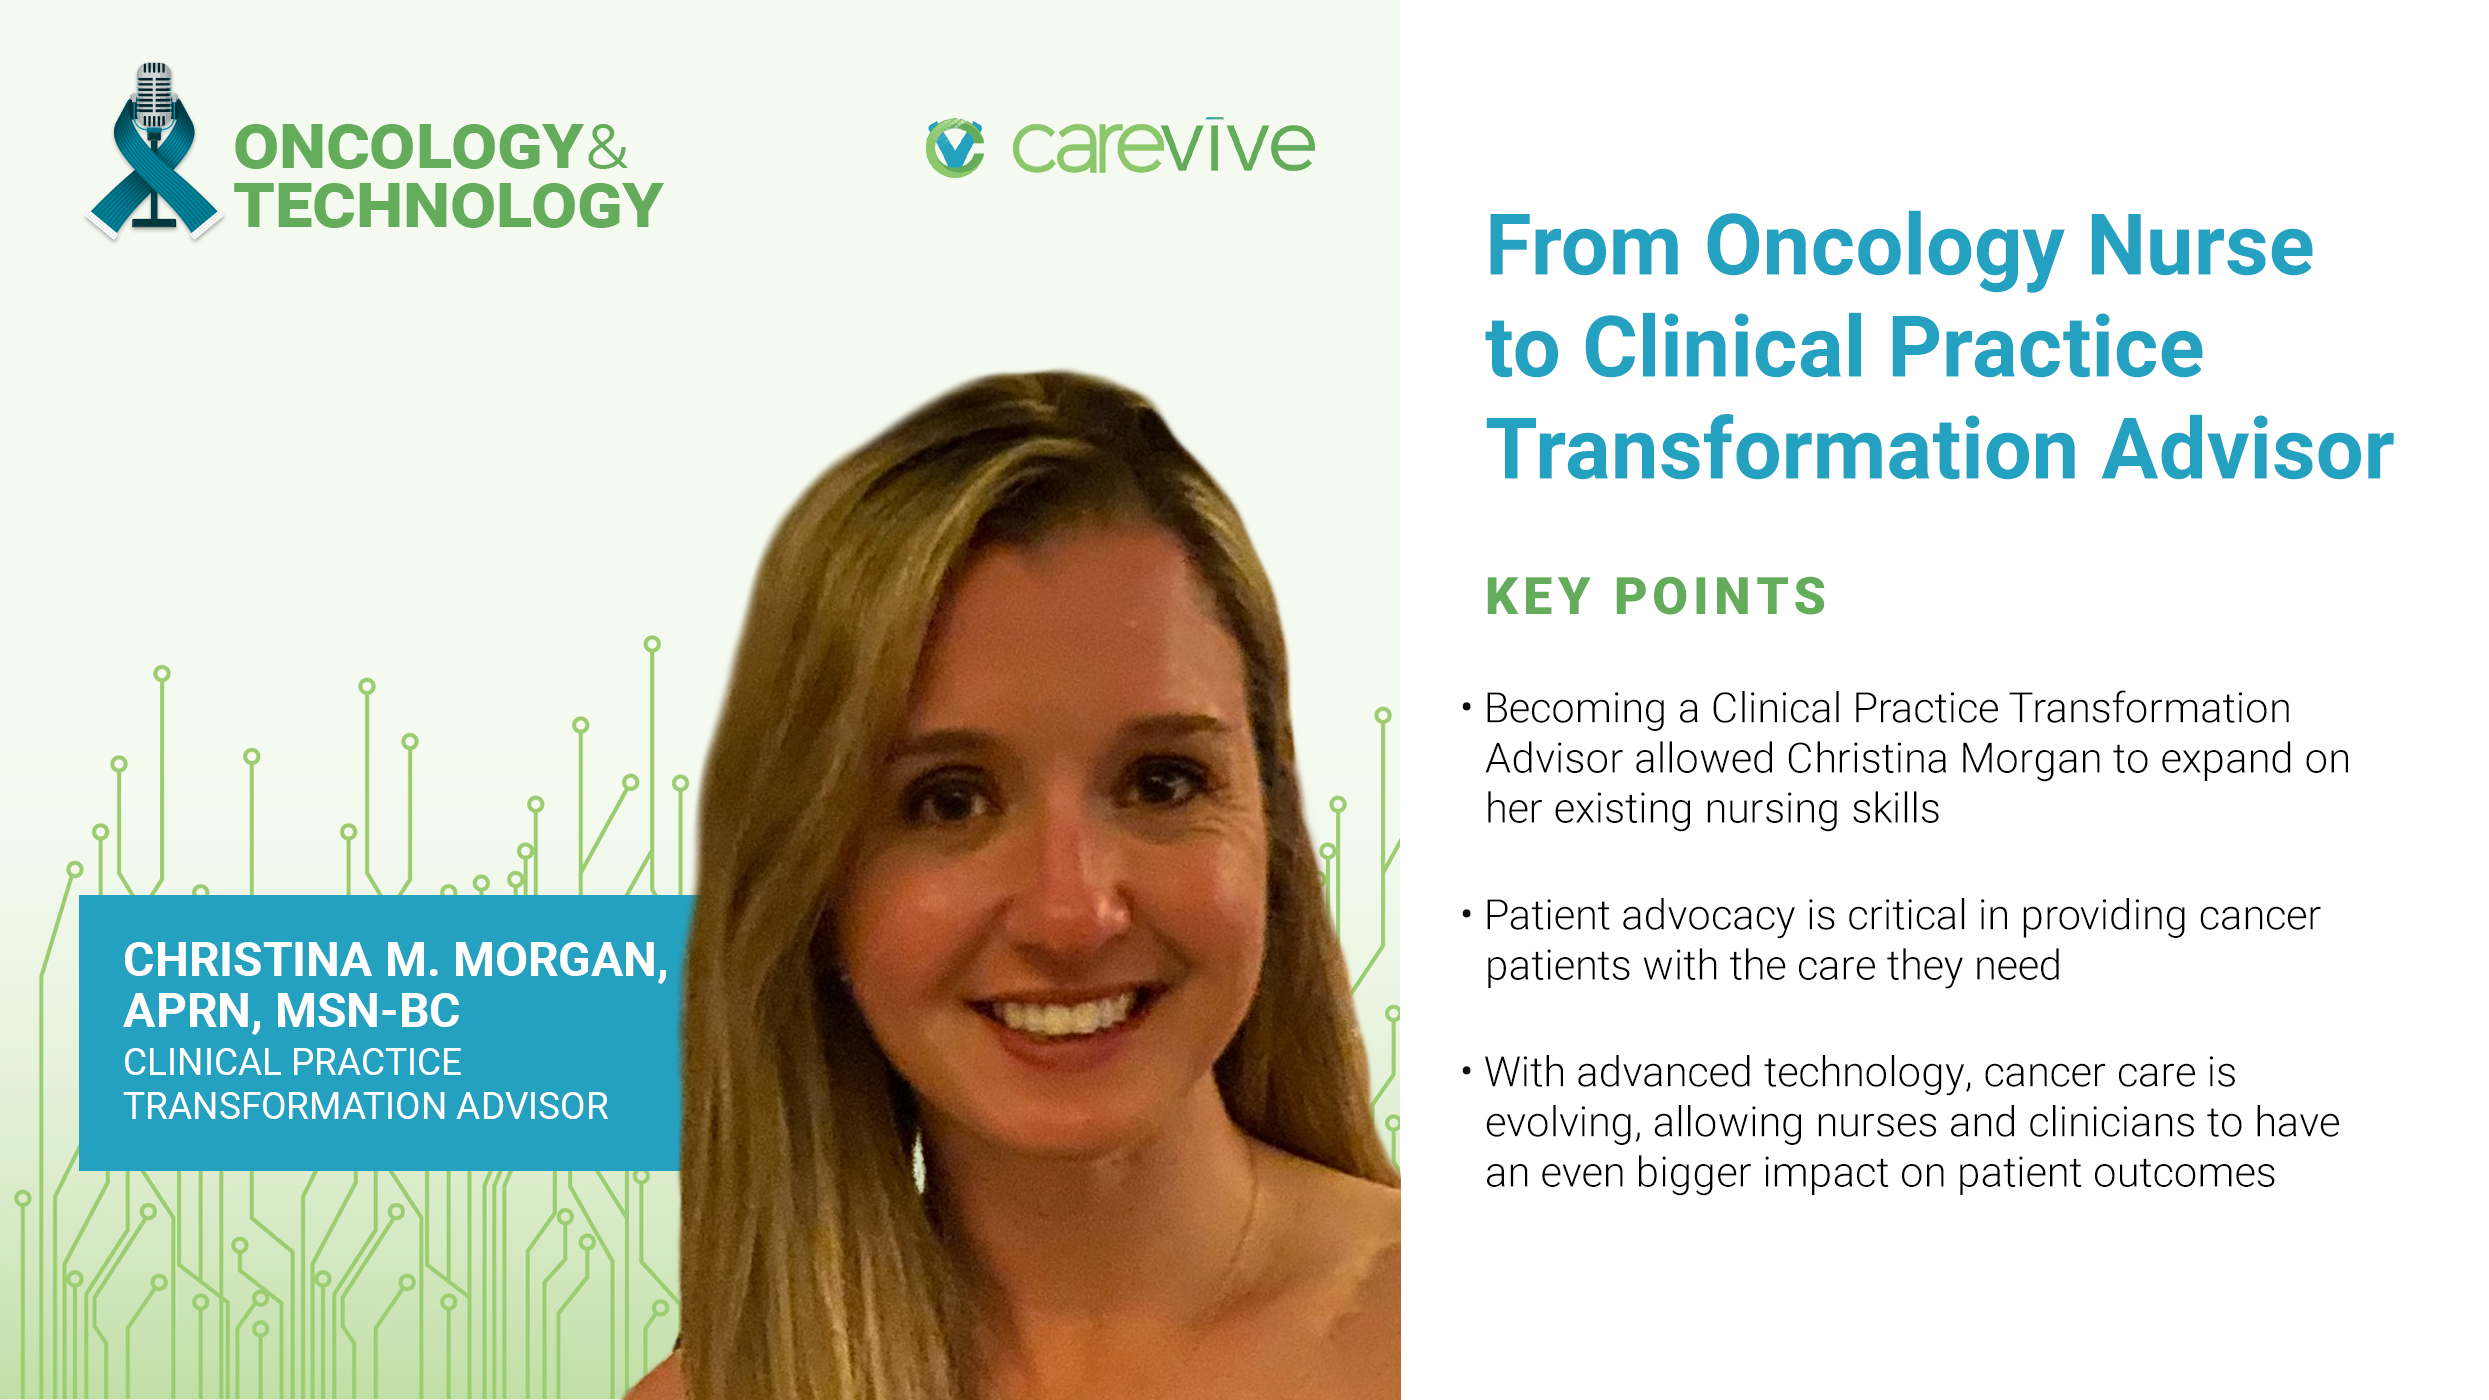 From Oncology Nurse to Clinical Practice Transformation Advisor